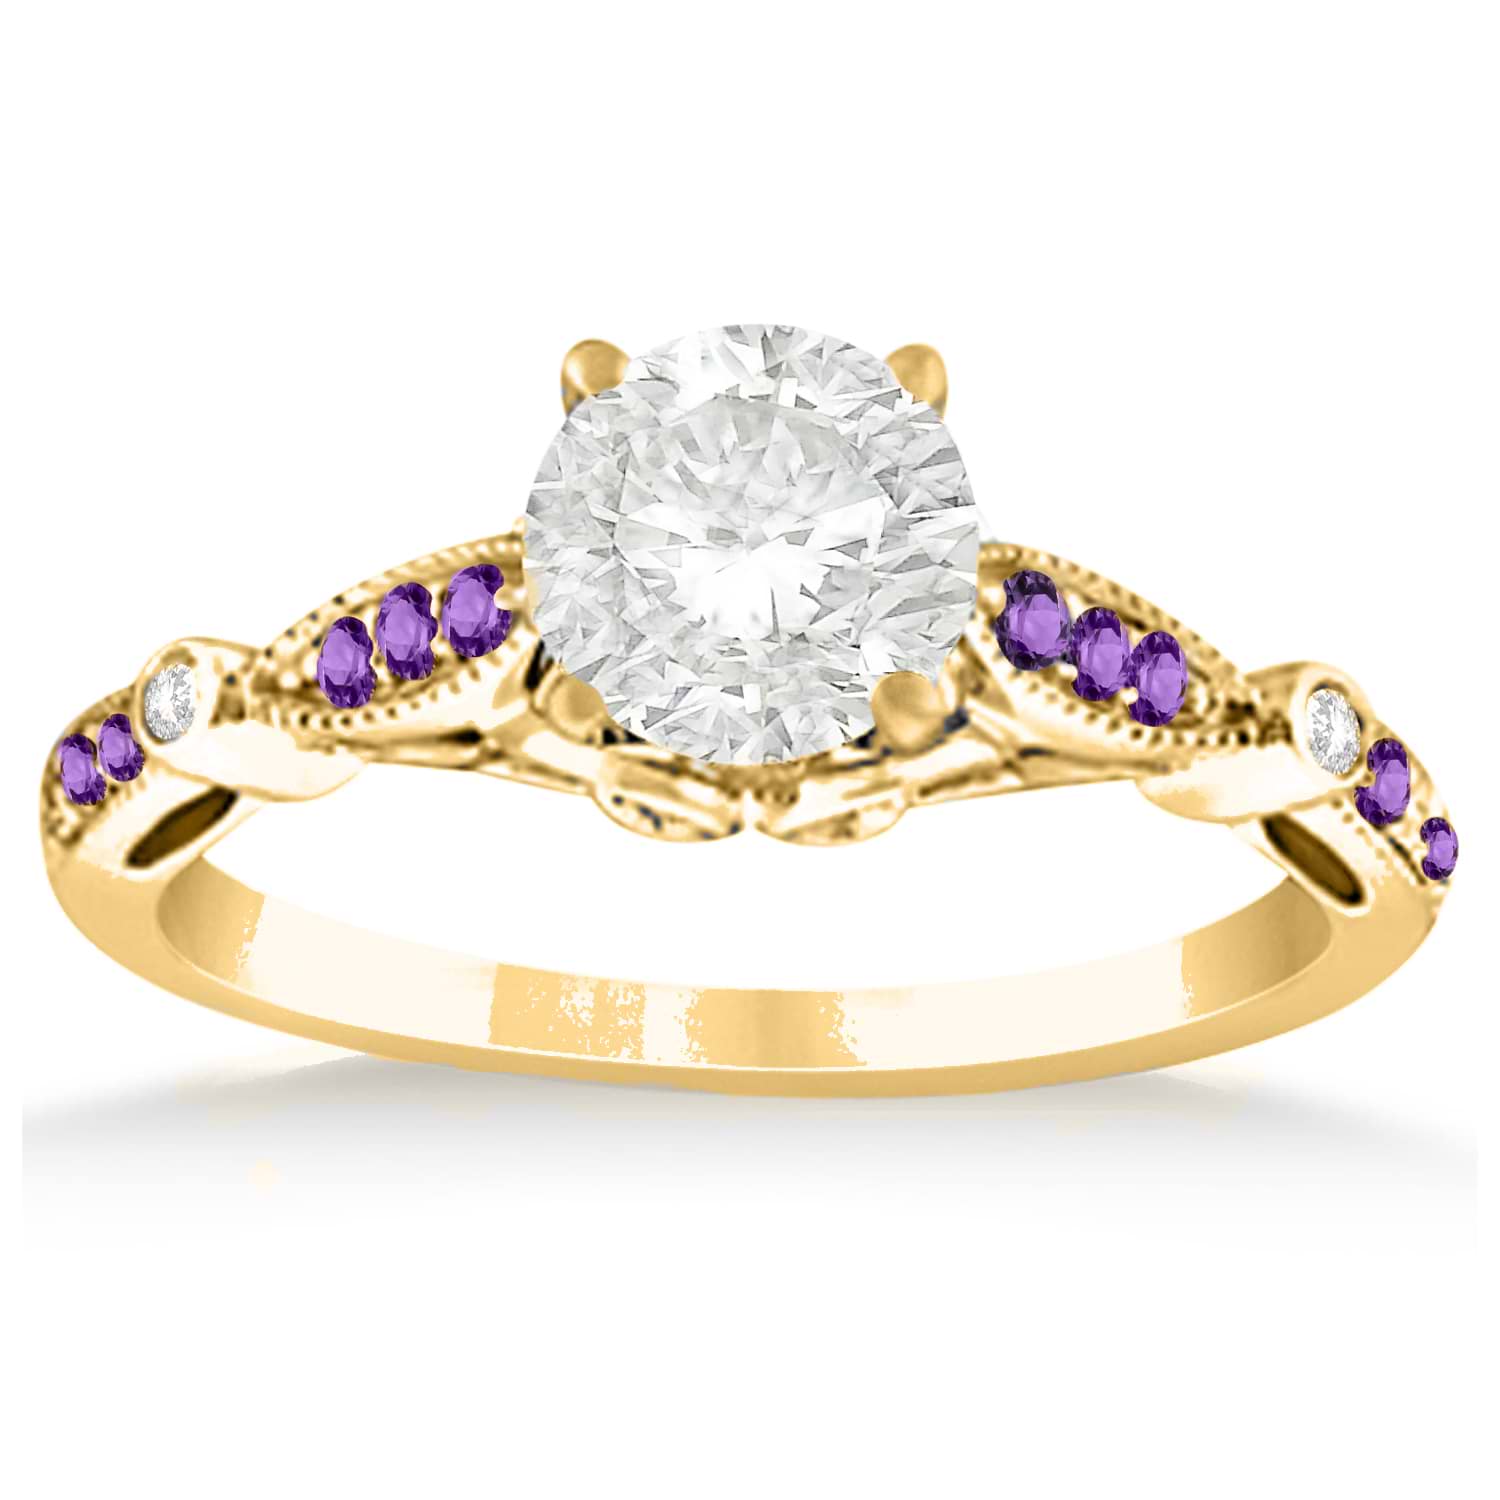 Marquise & Dot Amethyst Vintage Engagement Ring 14k Yellow Gold 0.13ct